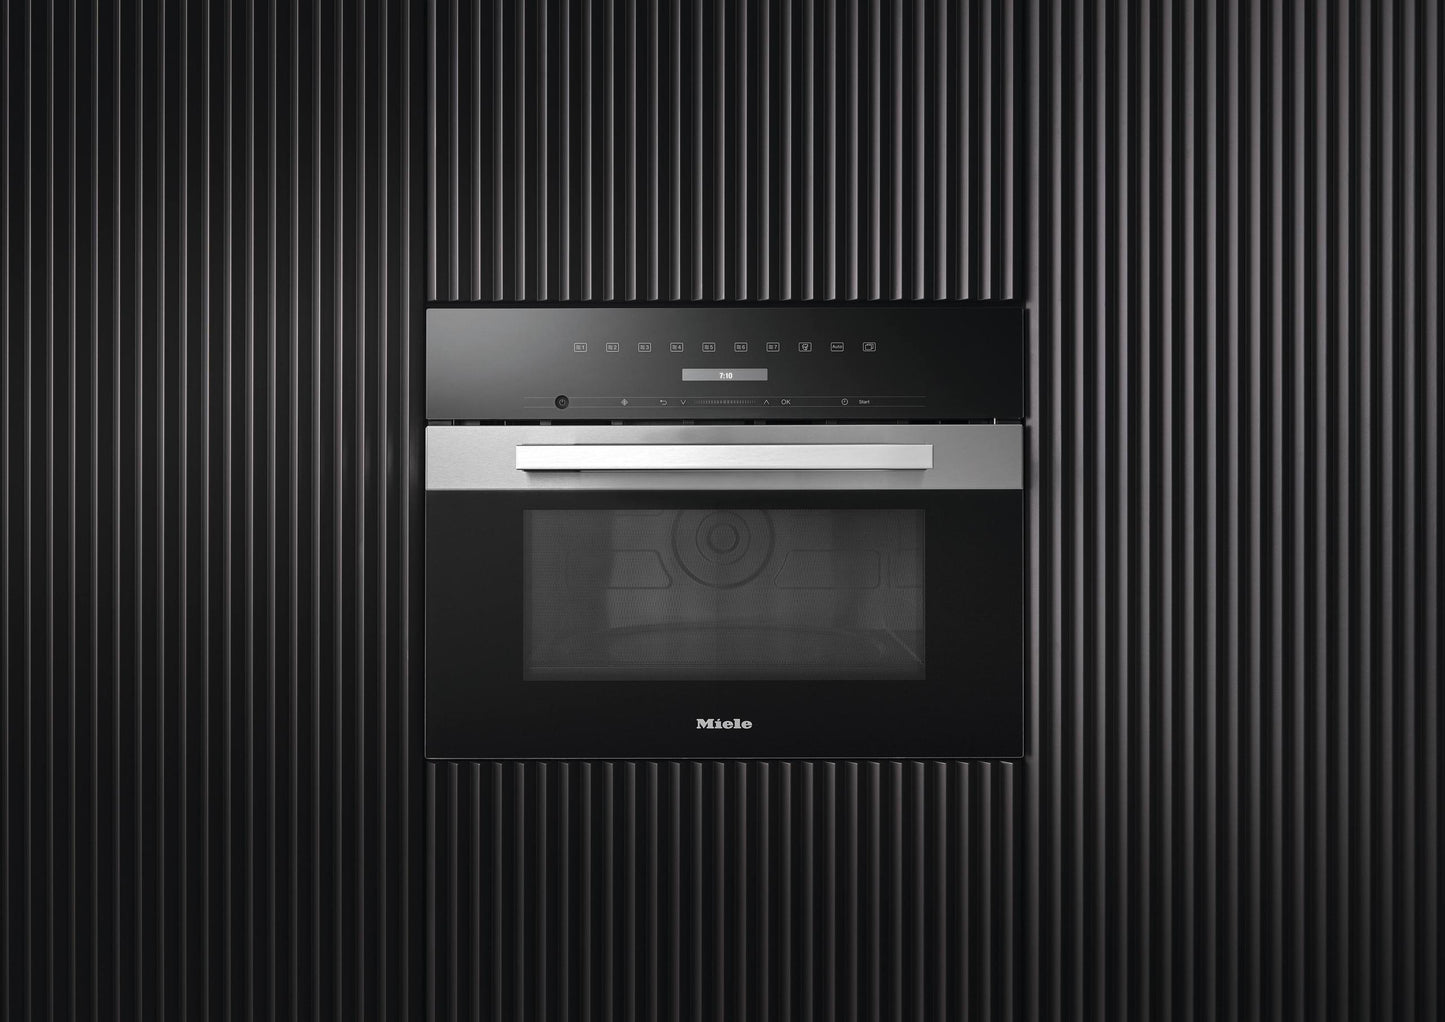 Miele M7240TCAMCLEANTOUCHSTEEL M 7240 Tc Am - Built-In Microwave Oven, 24" Width In A Design That Is The Perfect Complement With Controls On The Top.